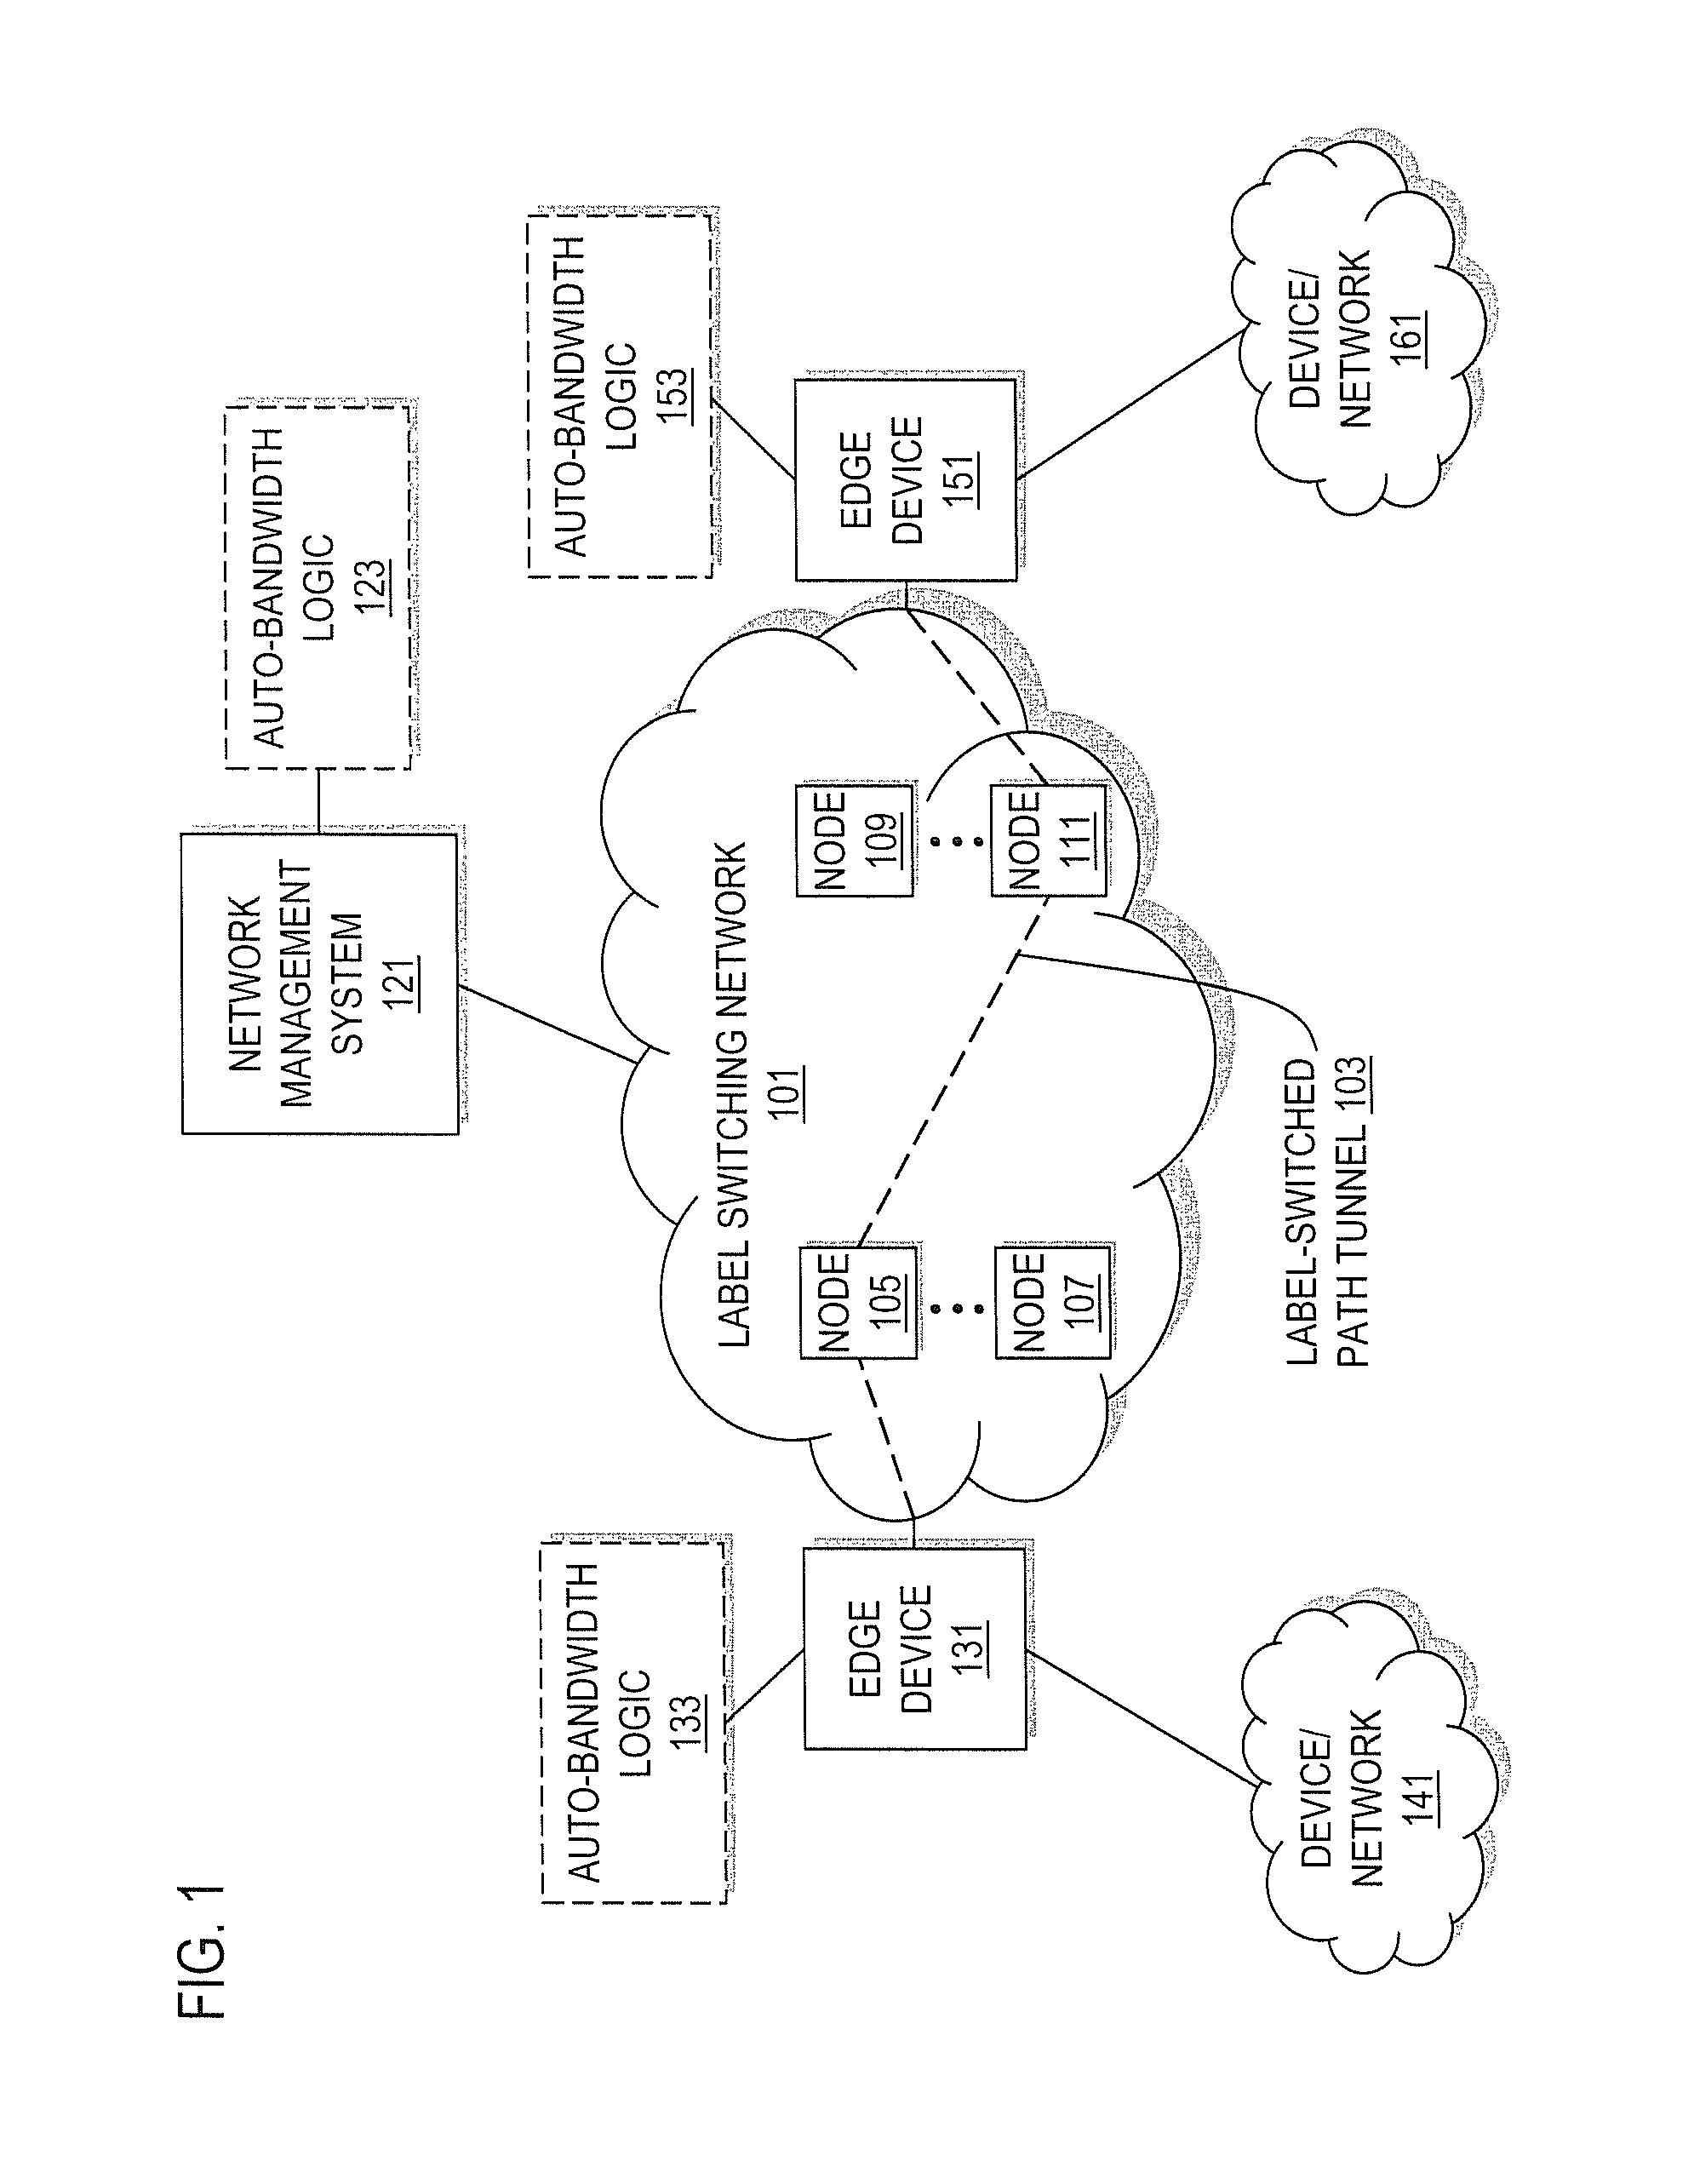 Method and system for adjusting bandwidth using multiple timers